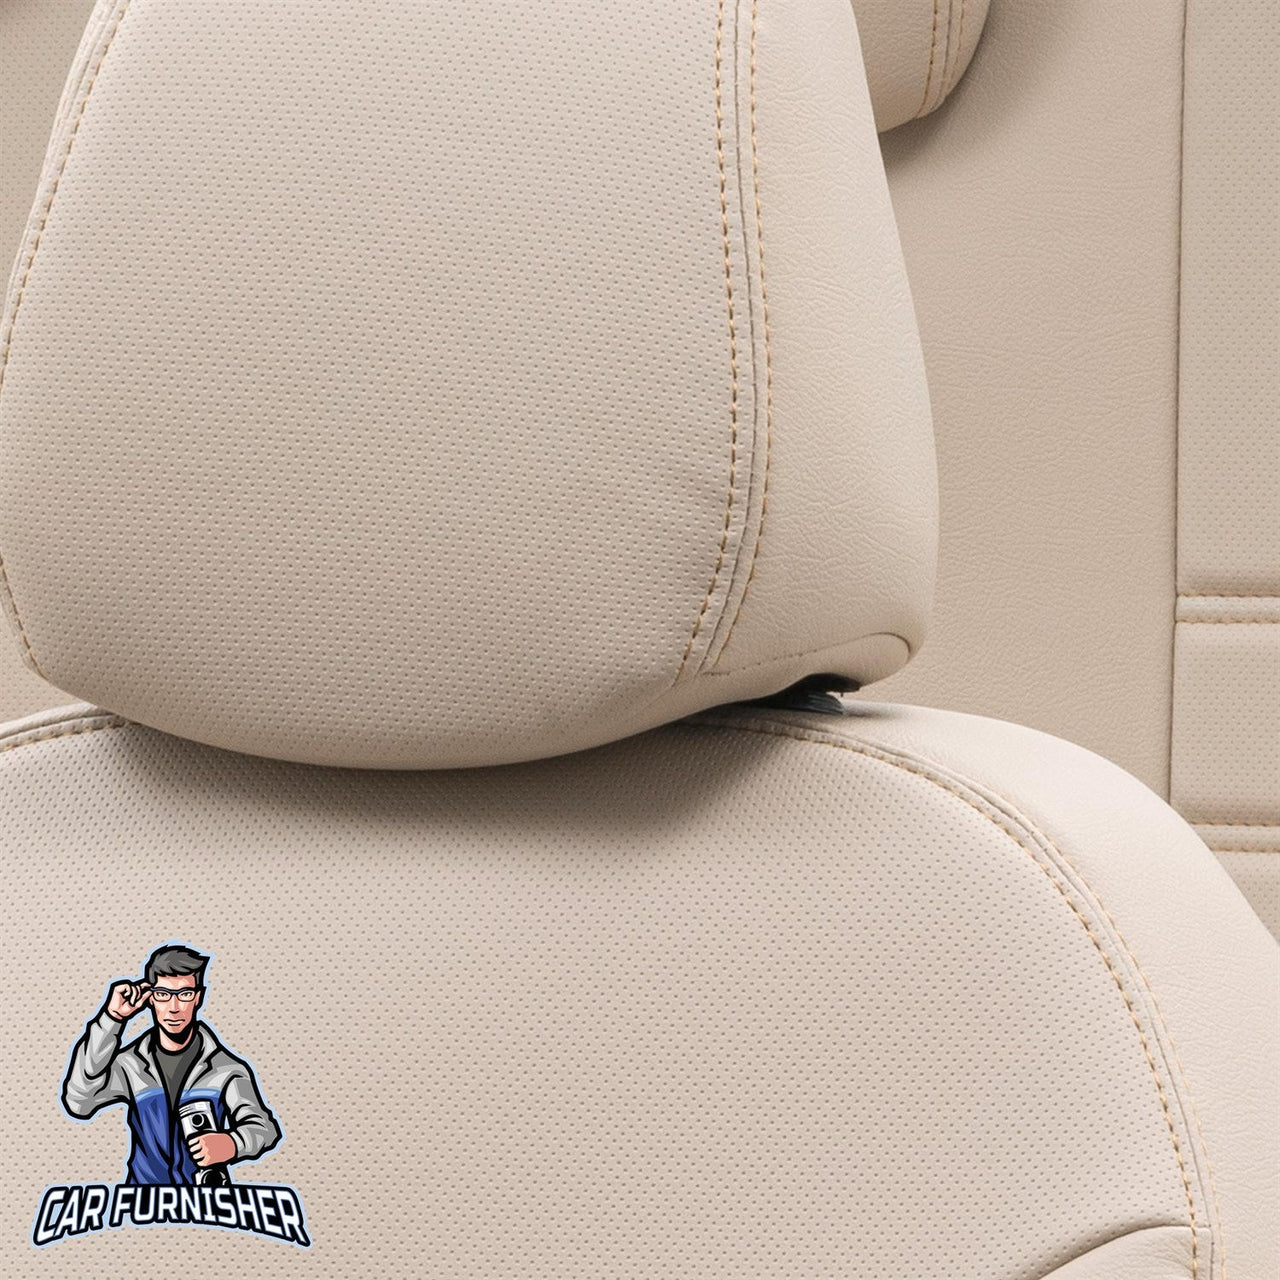 Mitsubishi Eclipse Cross Seat Covers Istanbul Leather Design Beige Leather